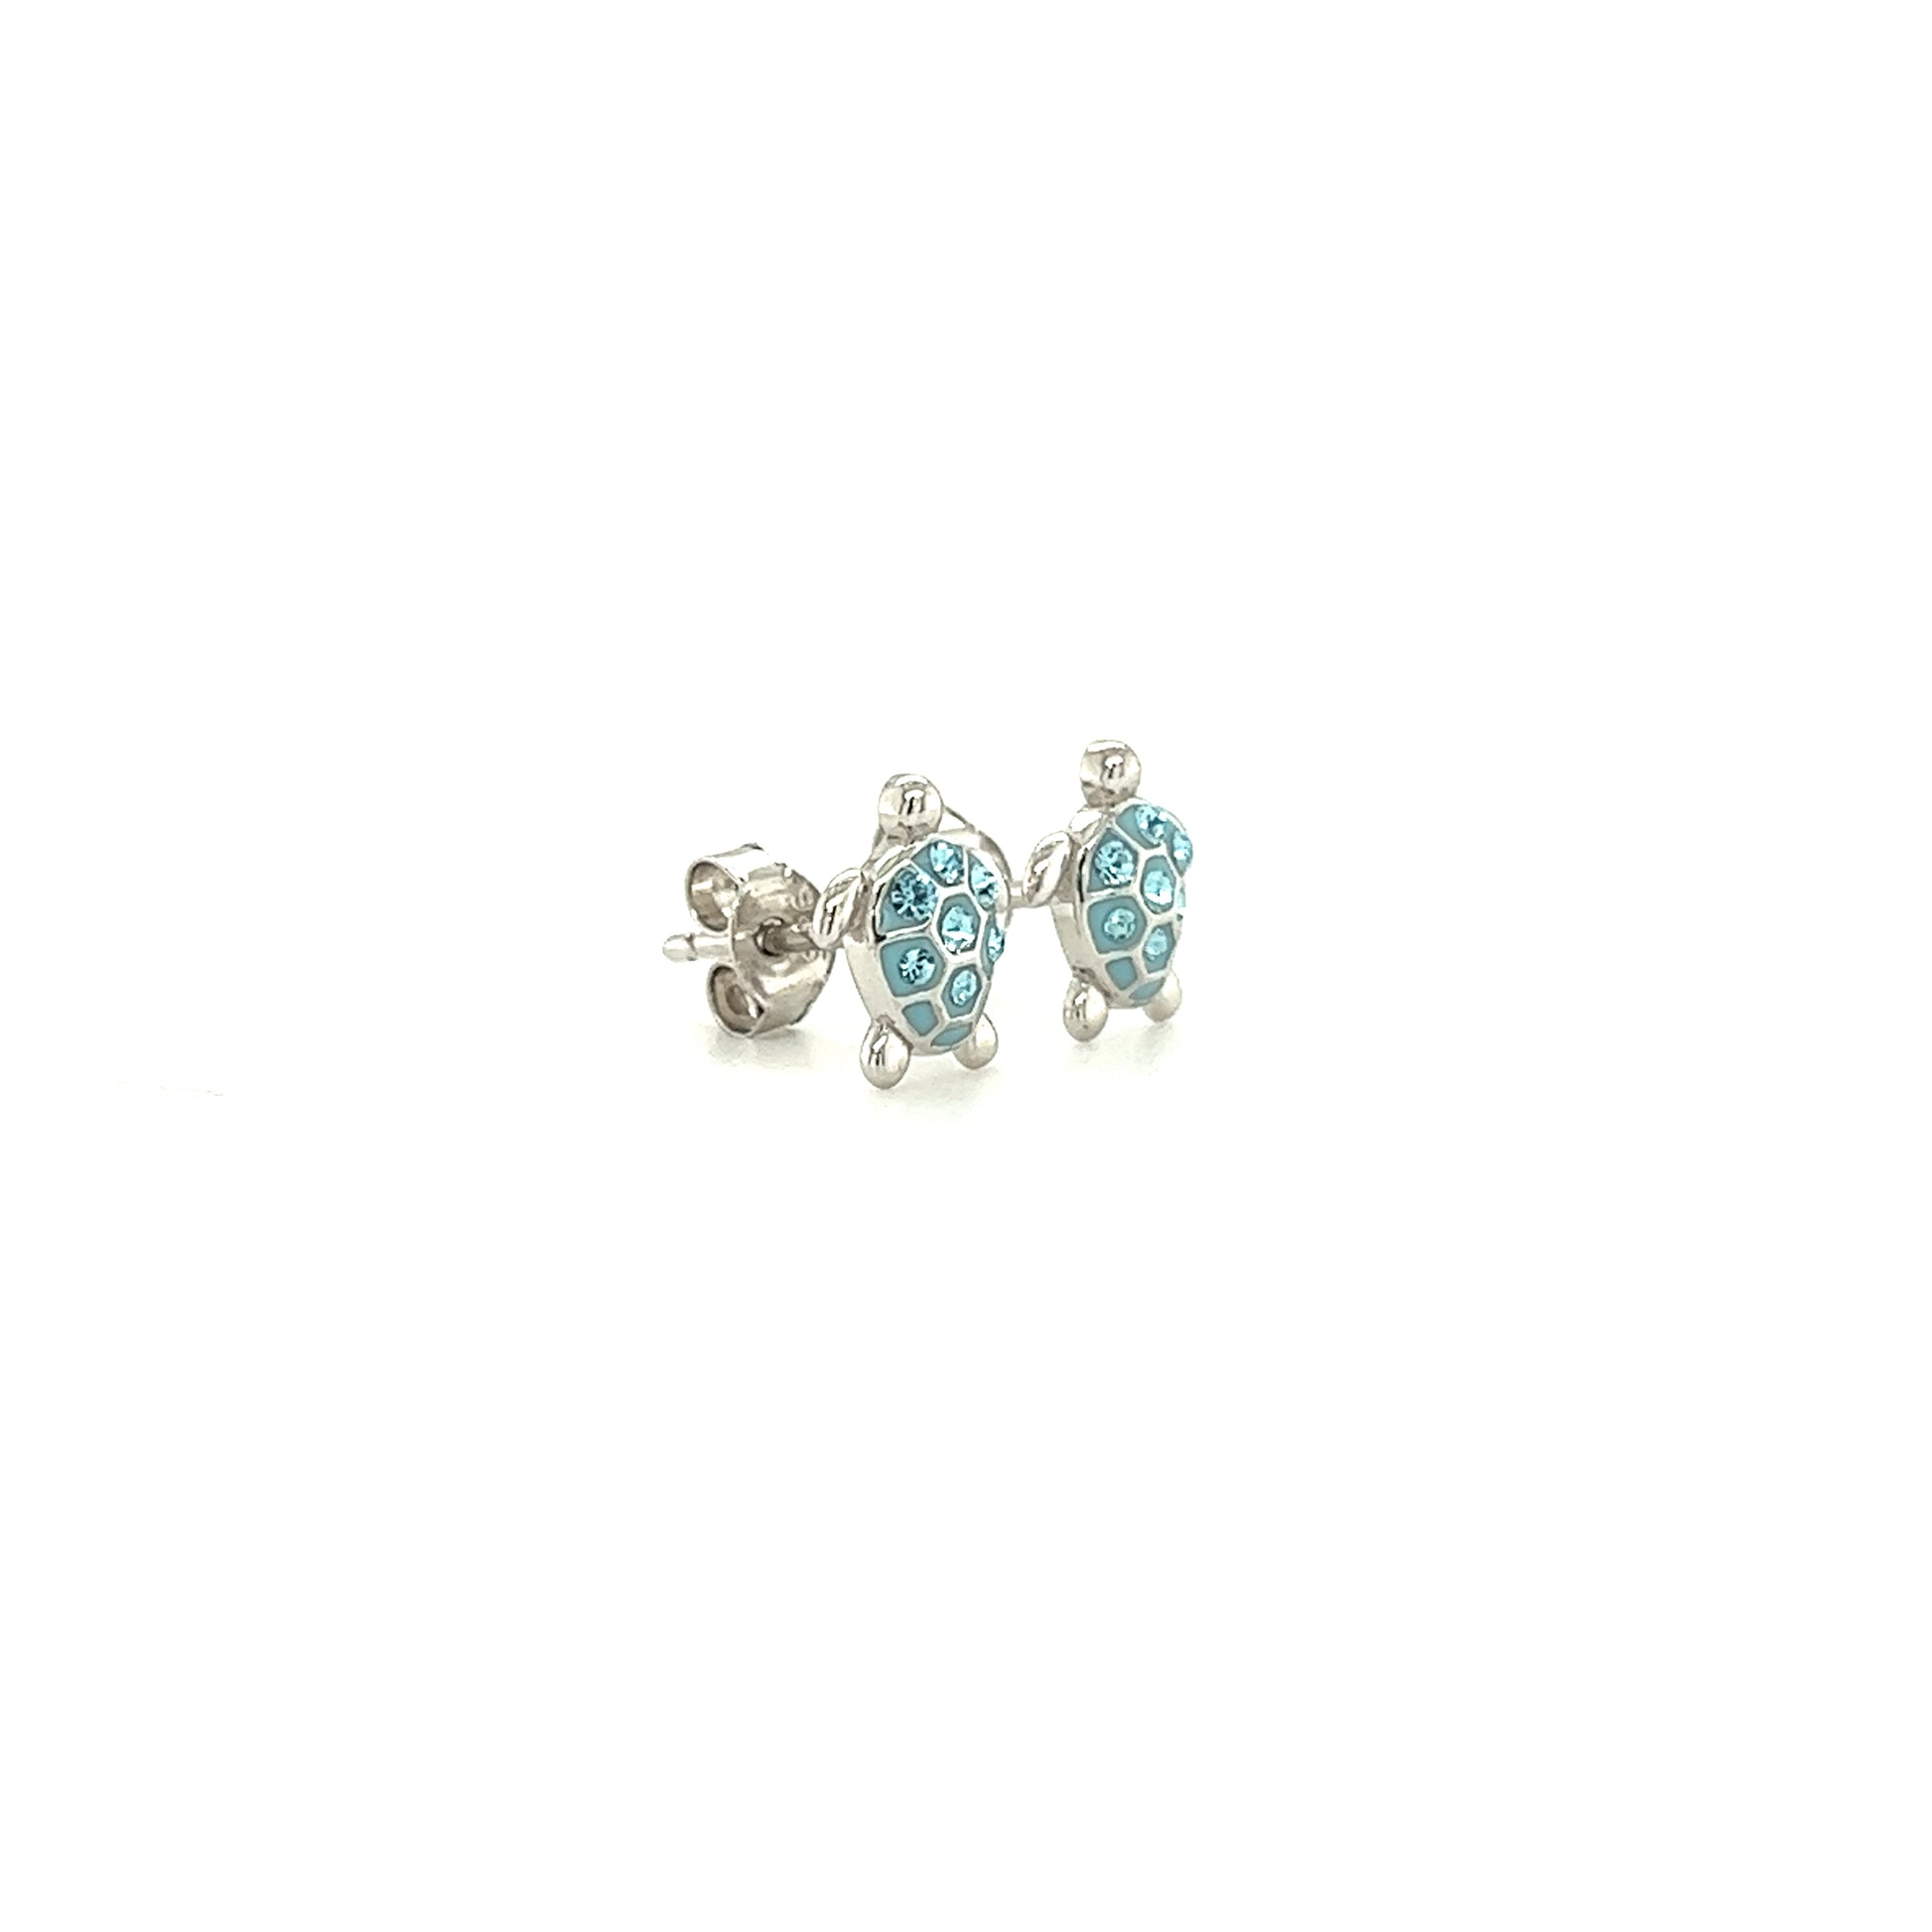 Sea Turtle Stud Earrings with Aqua Crystals in Sterling Silver Left Side View